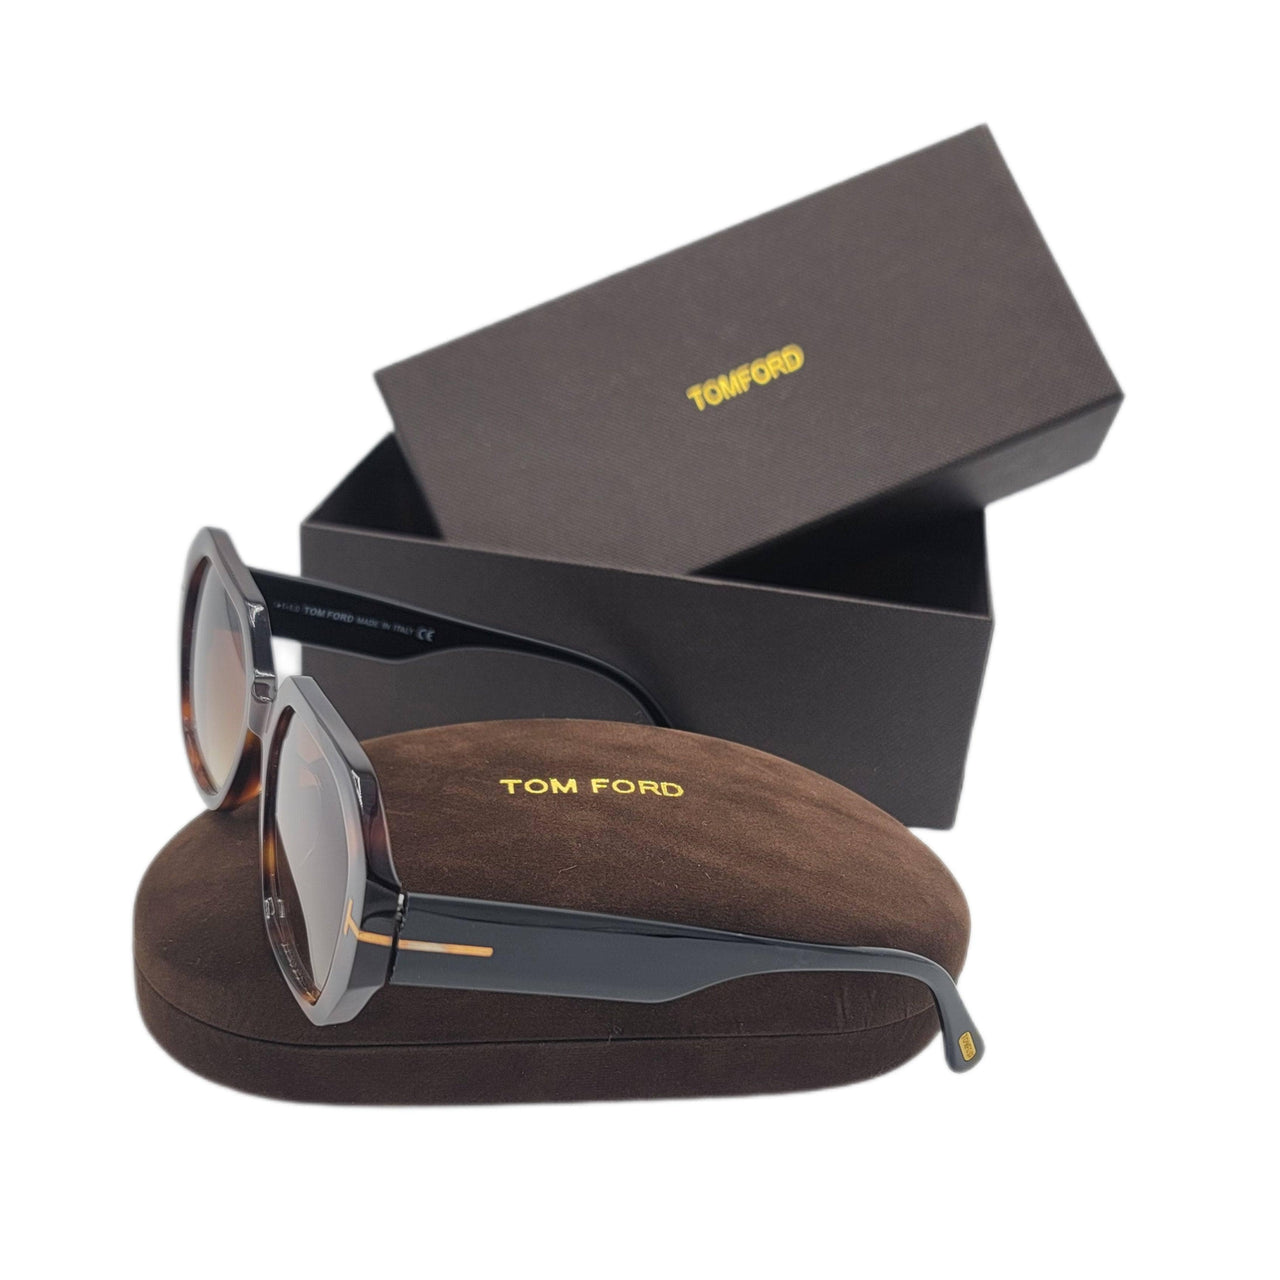 The Bag Couture Sunglasses Tom Ford Sunglasses 2BR